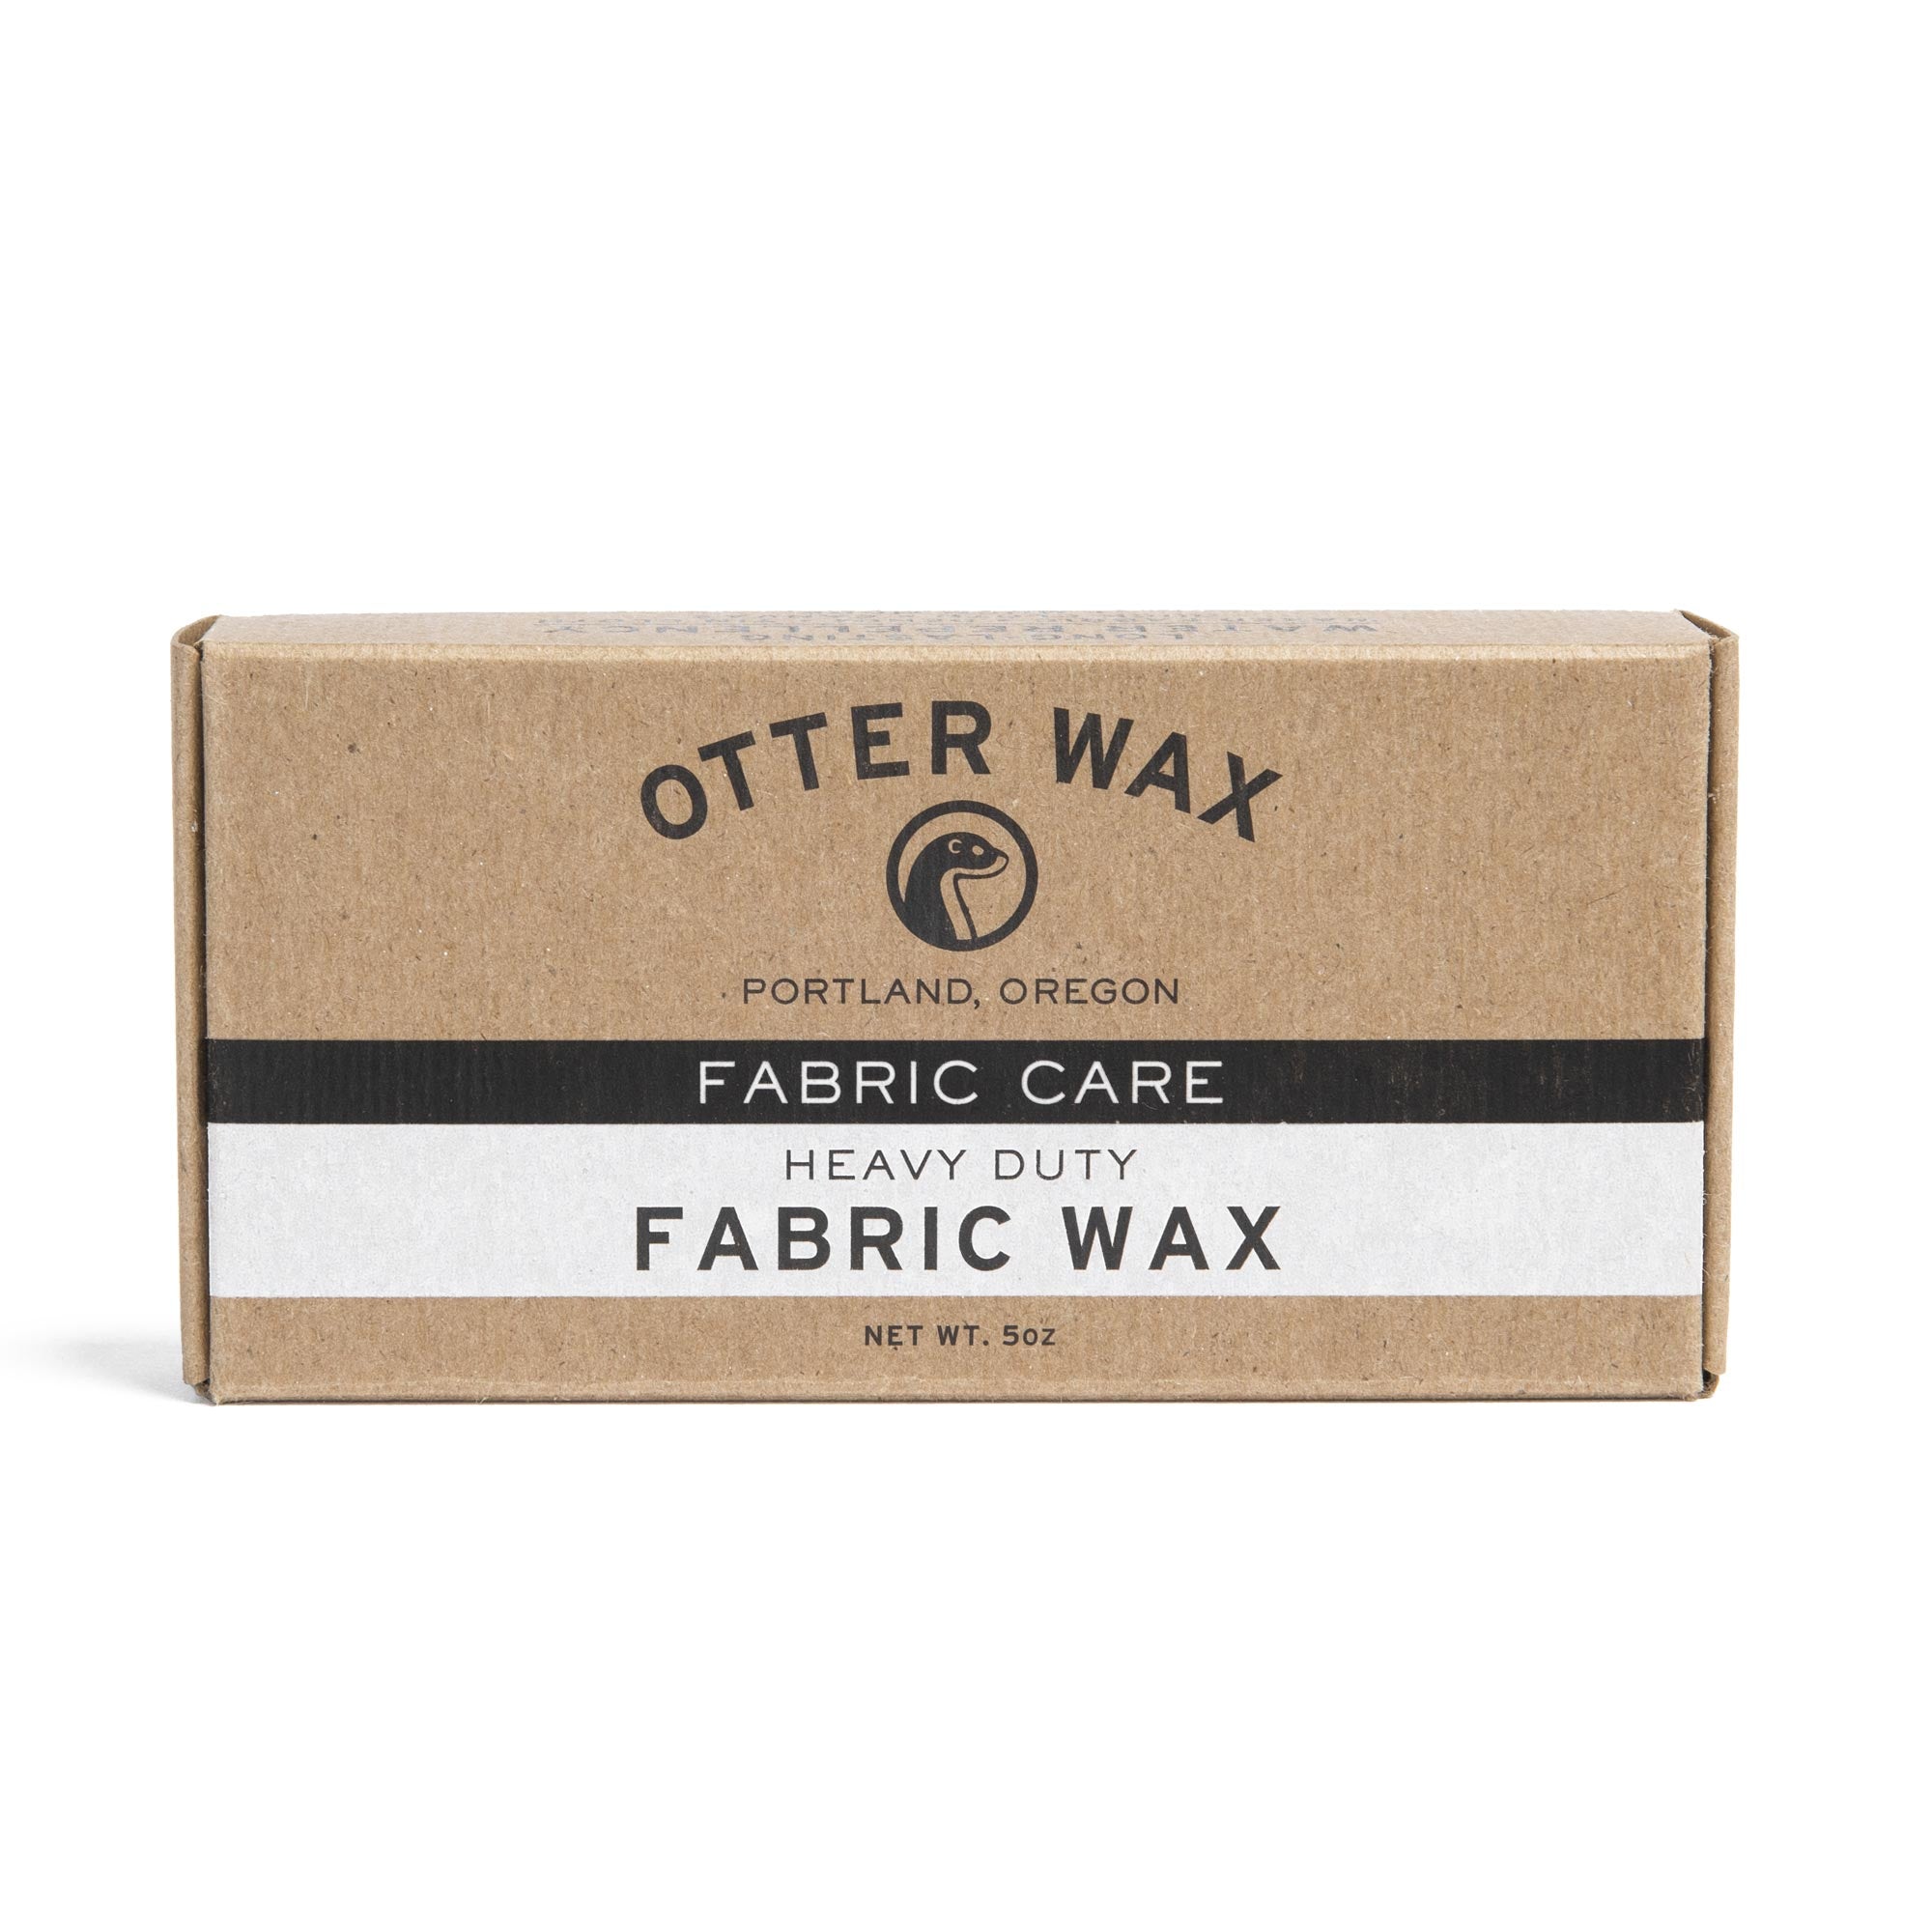 Otter Wax Heavy Duty Fabric Wax Large 5oz Bar Best Natural And Handmade Wax To Waterproof And Protect Canvas Tincloth And Oilcloth Fabric